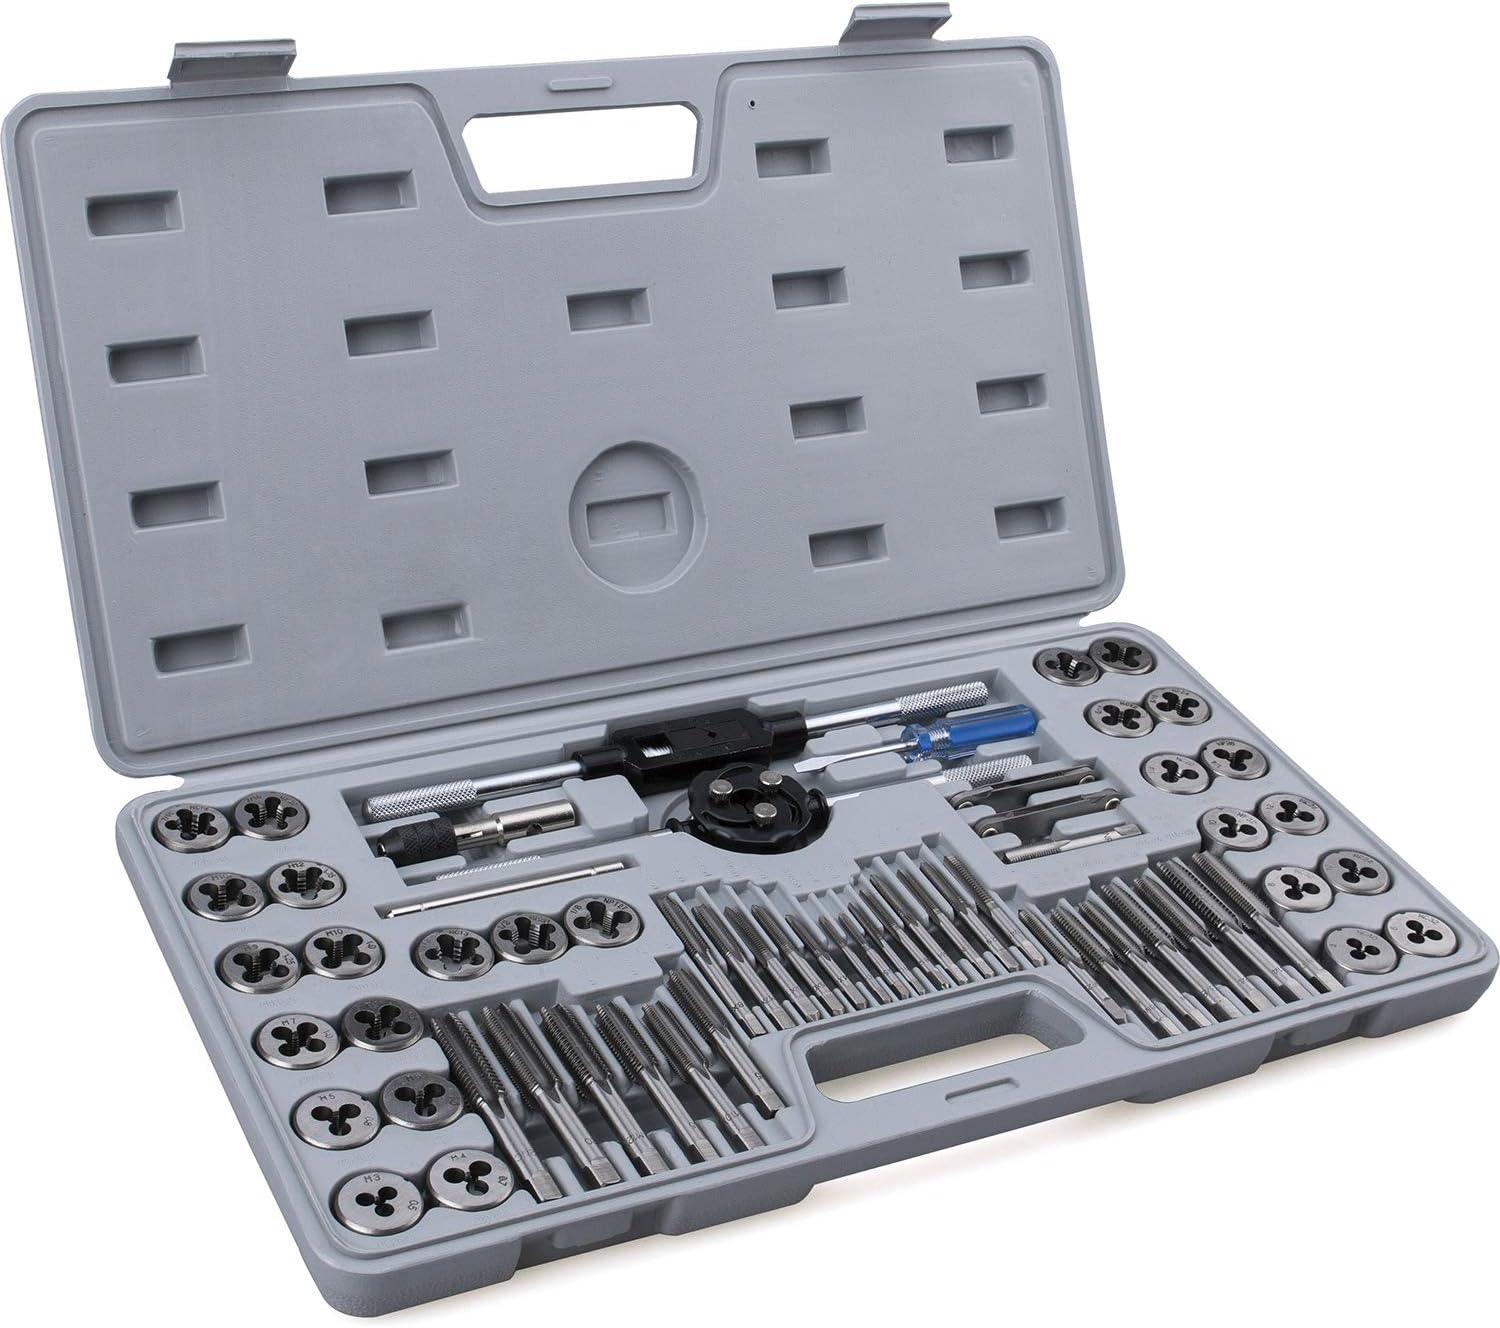 tap and die set detailed review